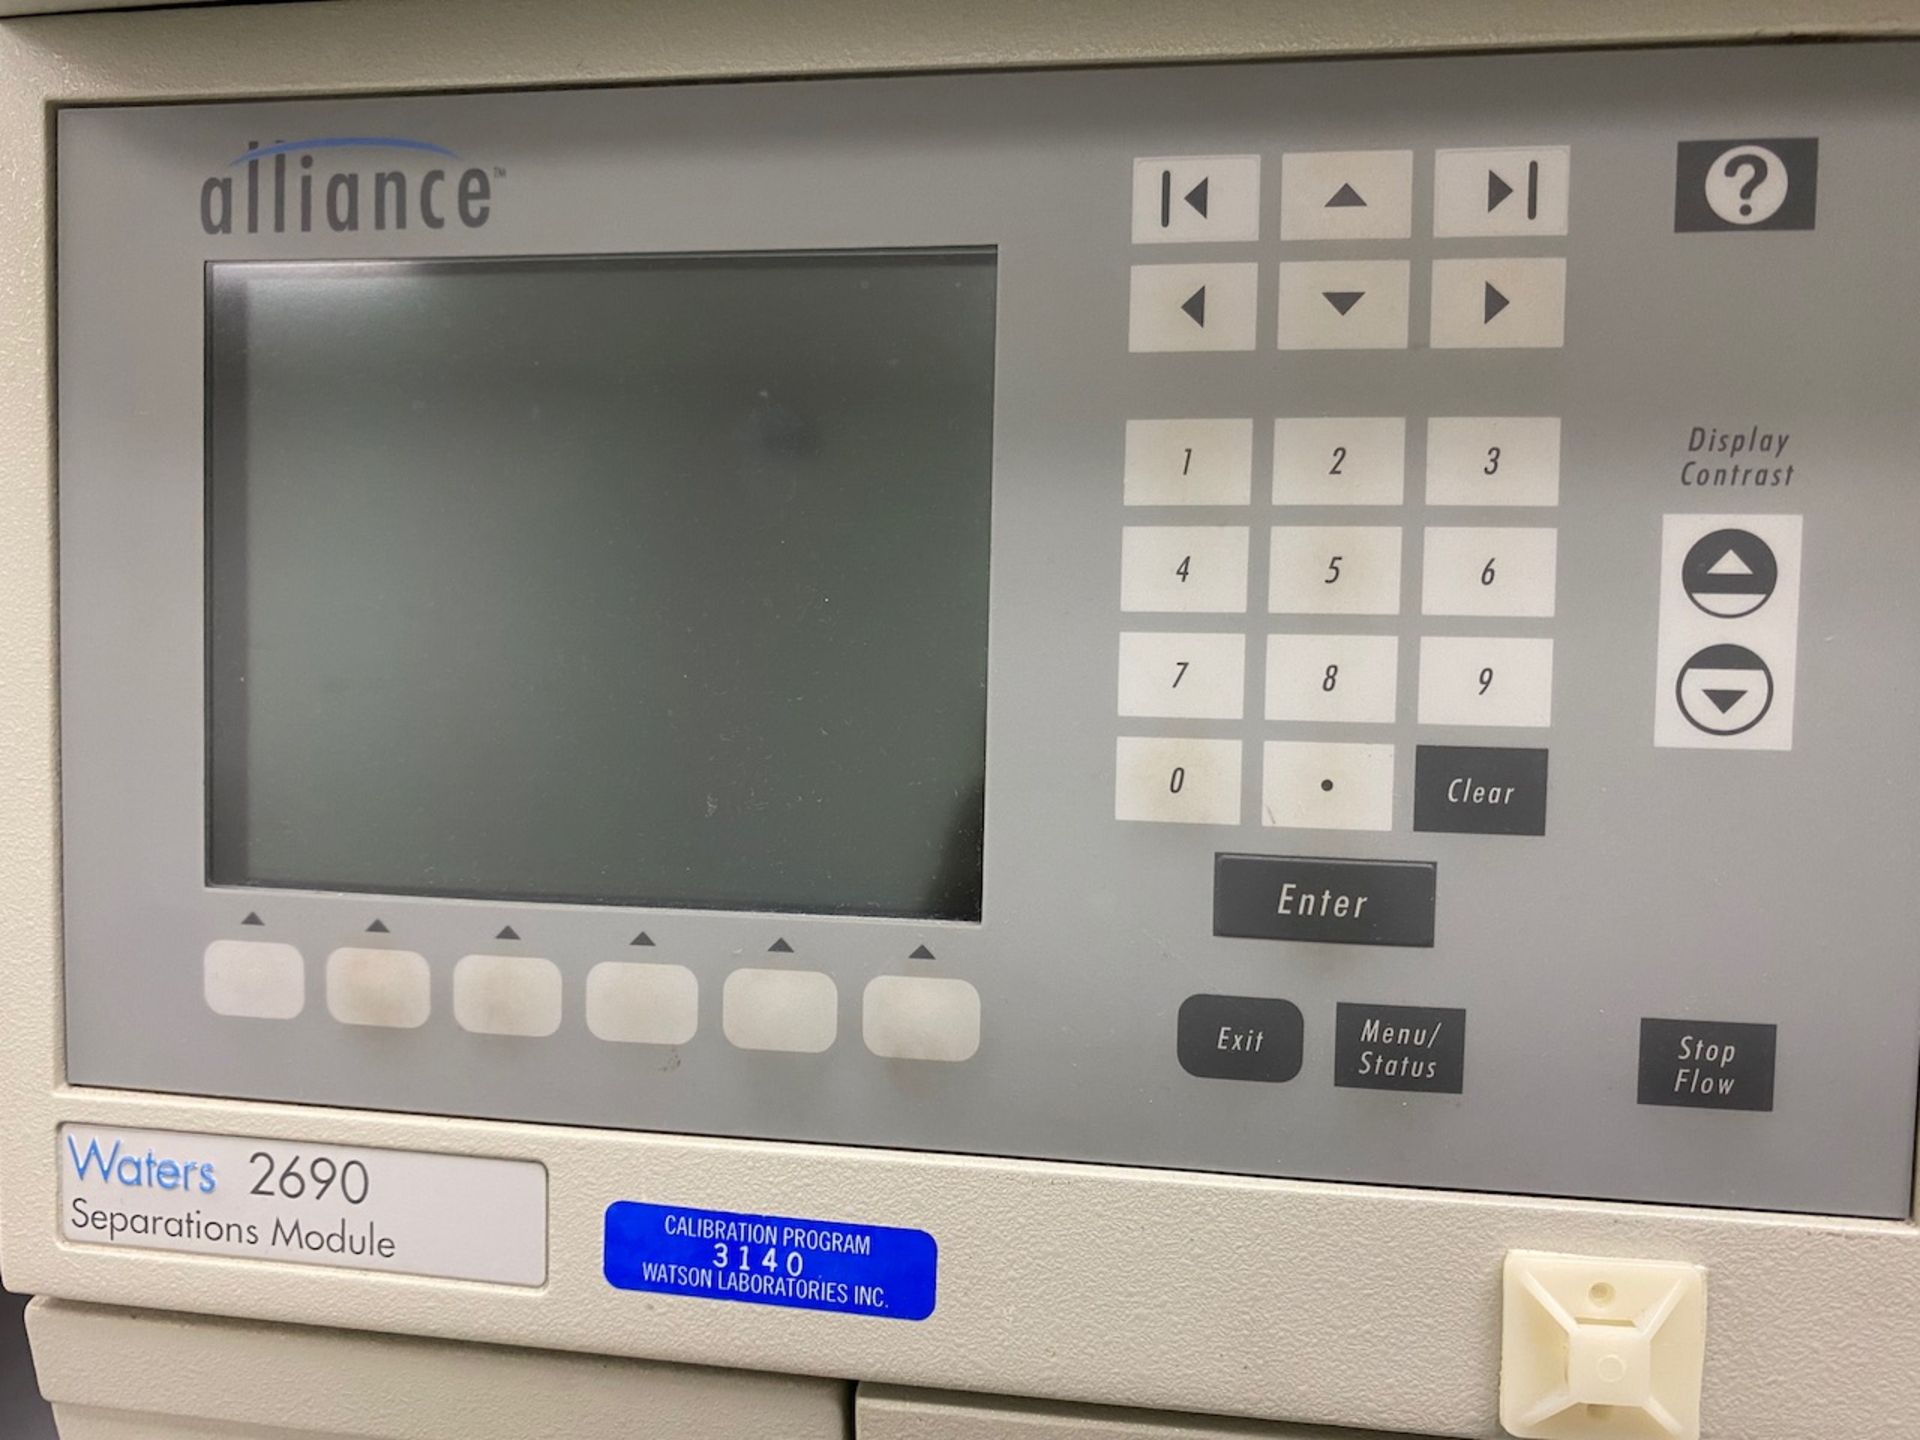 Alliance Waters HPLC - Image 2 of 4